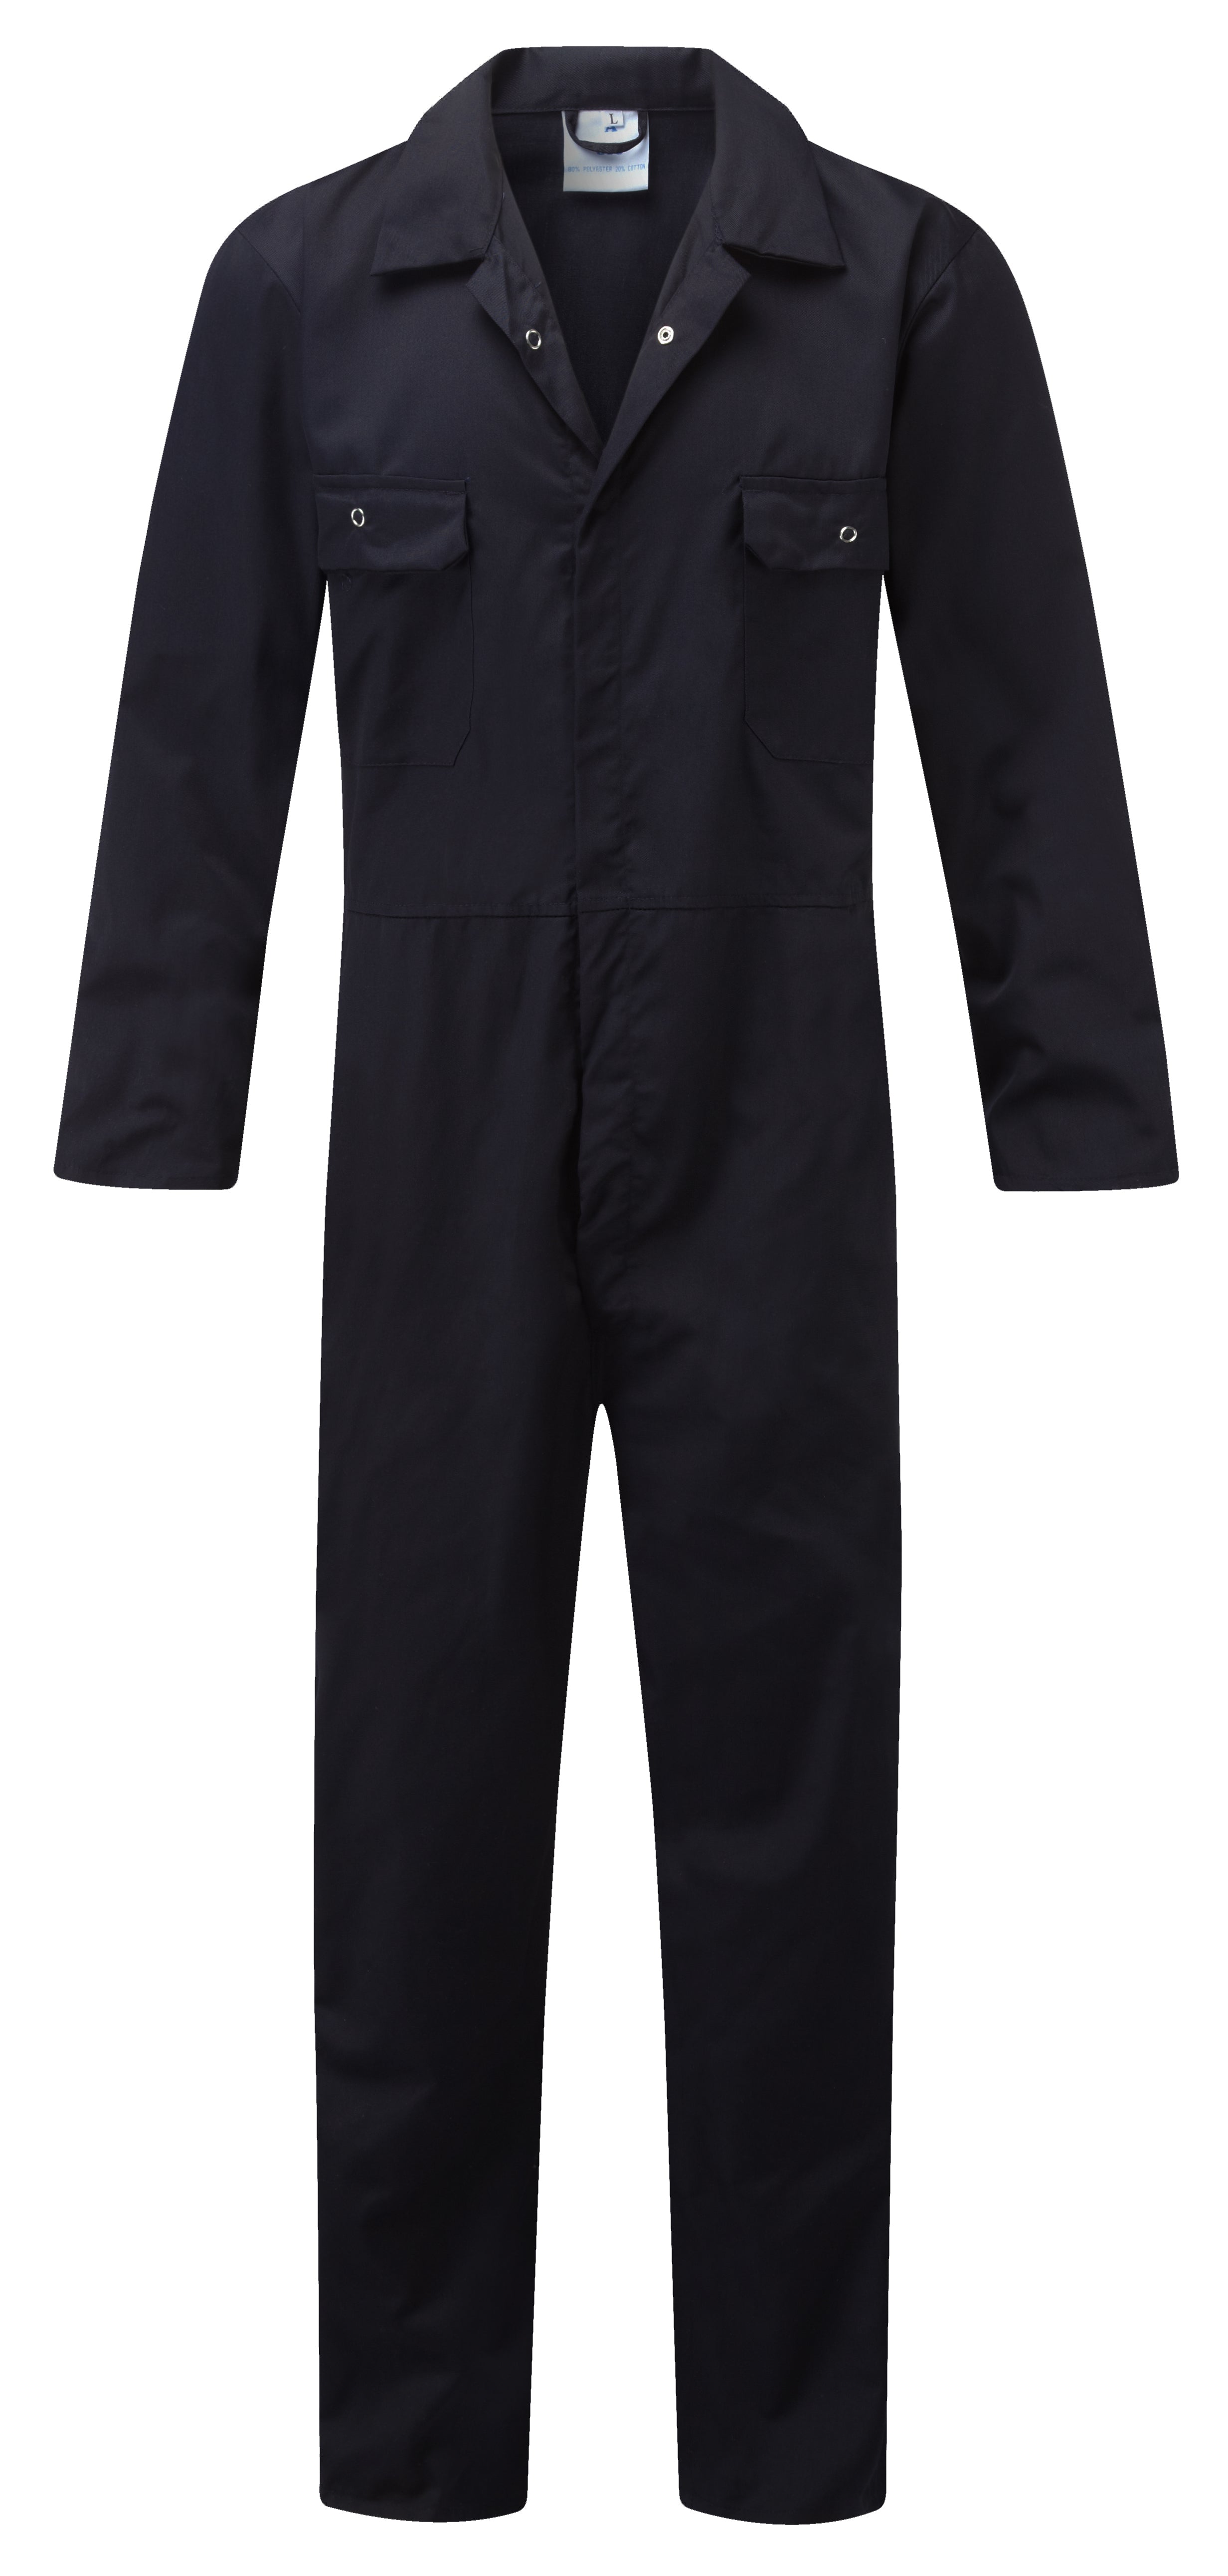 FORT WORKFORCE COVERALL (318)